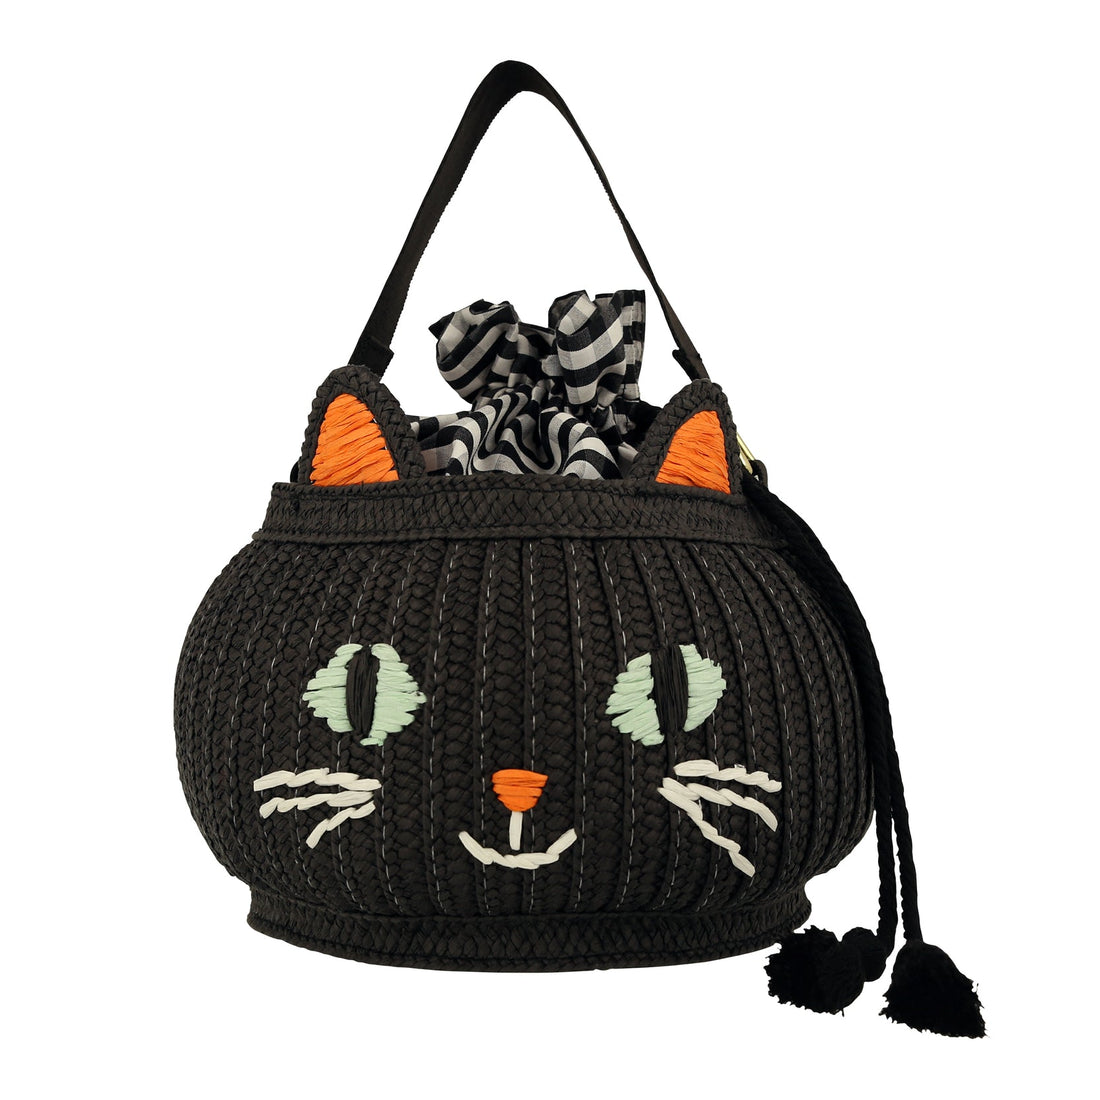 black basket bag with cat face stitched on the front